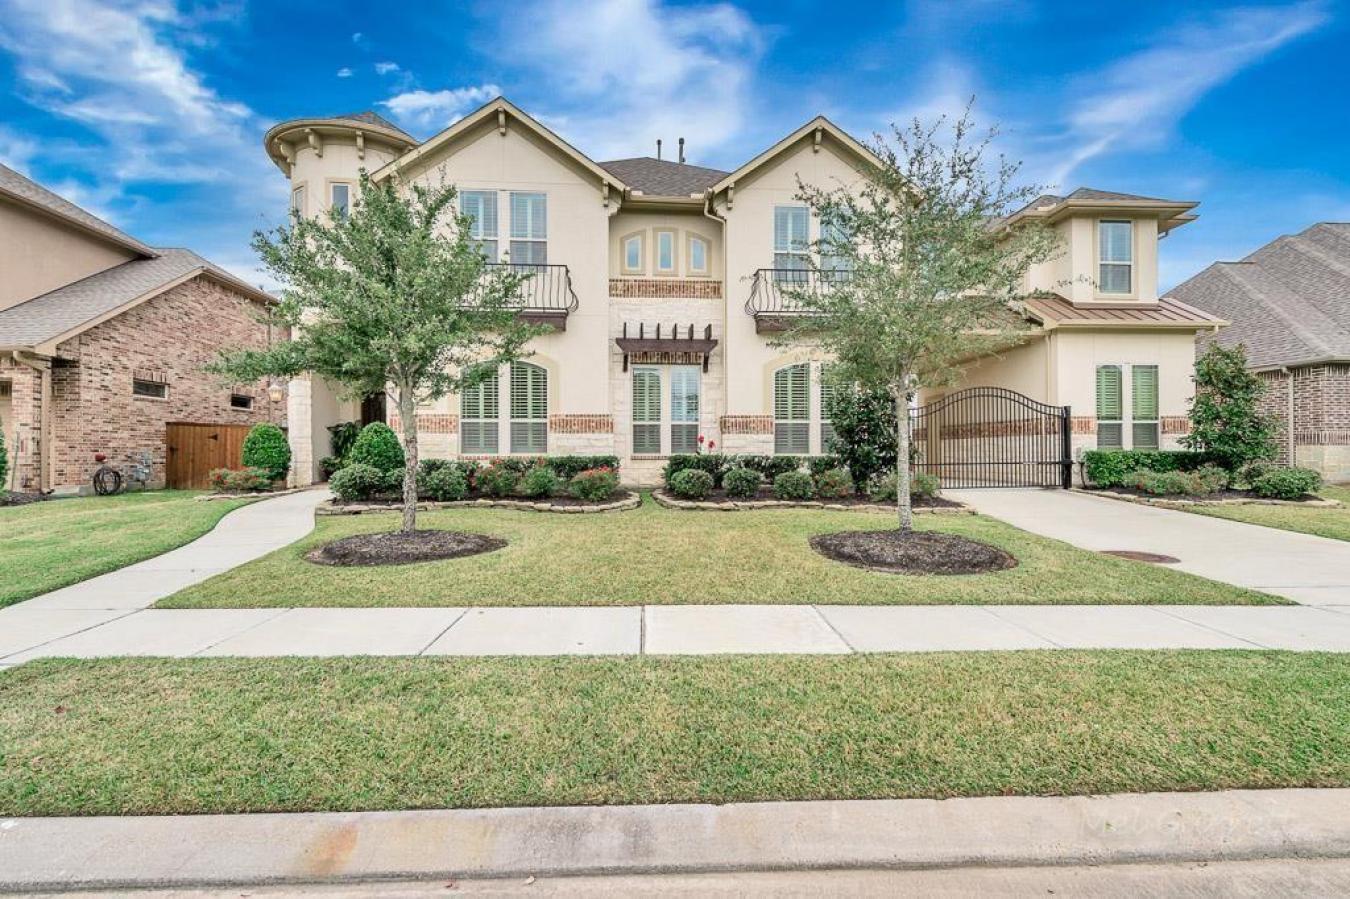 11311 Sardinia Drive, Richmond, Texas, 77406, United States, 5 Bedrooms Bedrooms, ,5 BathroomsBathrooms,Residential,For Sale,11311 Sardinia Drive,1468504